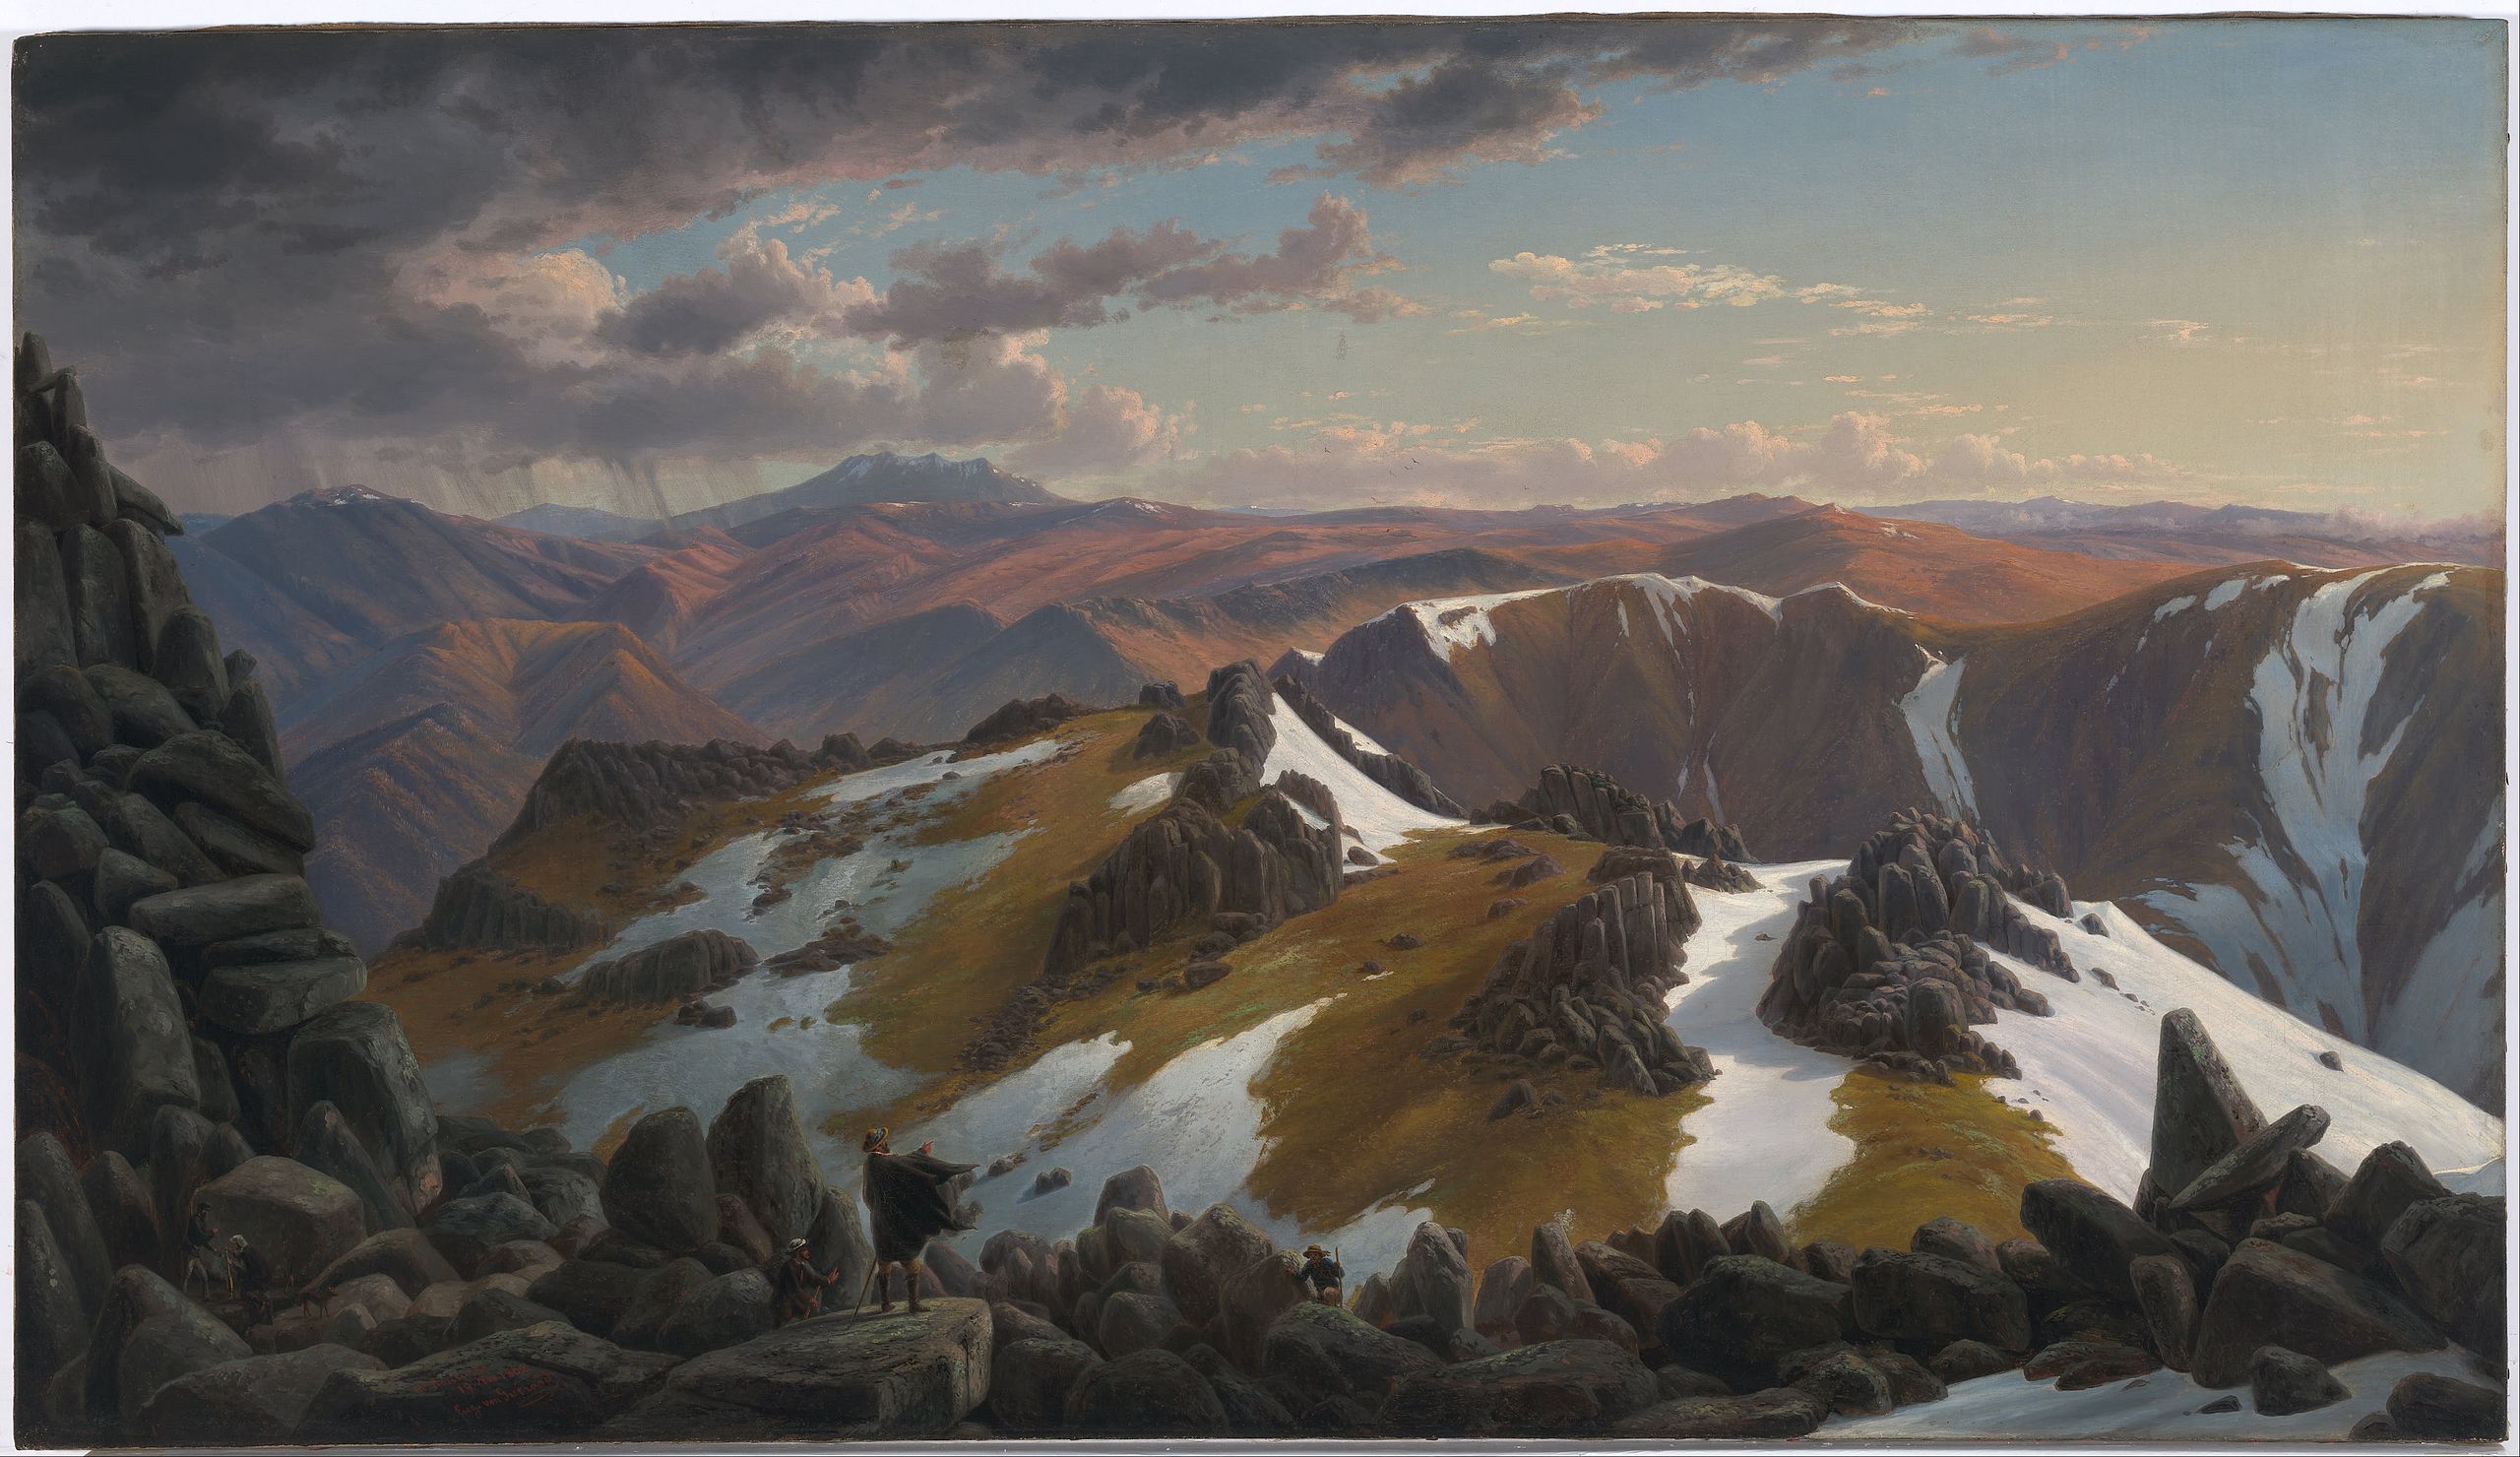 North-east view from the northern top of Mount Kosciusko by Eugene von Guérard - 1863 - 66.5 x 116.8 cm National Gallery of Australia